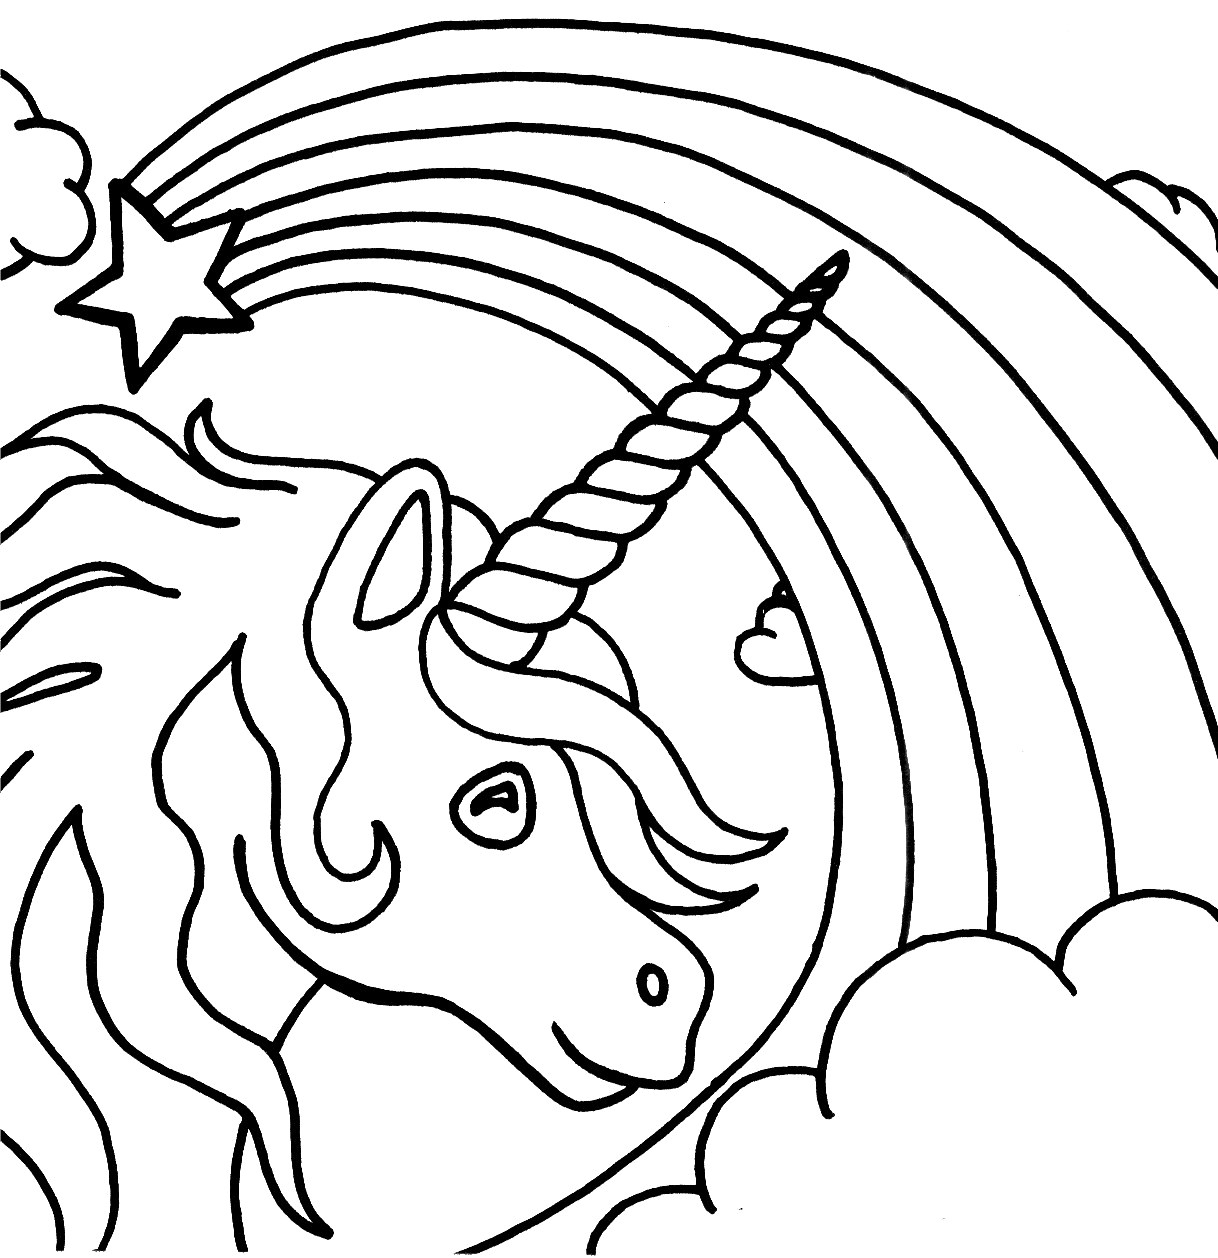 Childrens Printable Coloring Pages Delivered Colouring Free Fresh 13 - Free Printable Coloring Books For Toddlers